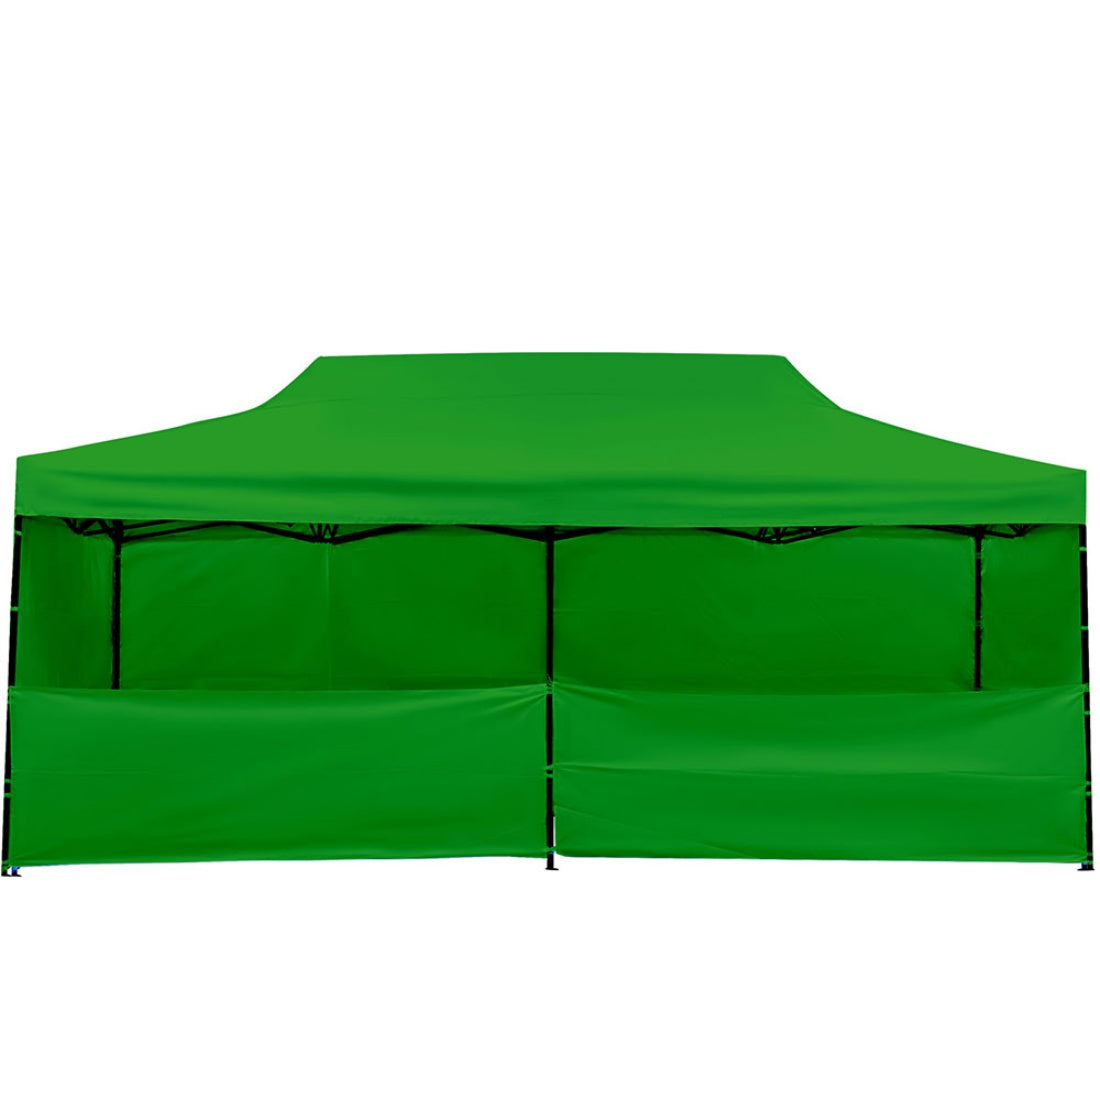 NEW PERFECT OASIS 3x6m Green Pop Up Gazebo Folding Marquee Tent Canopy Party